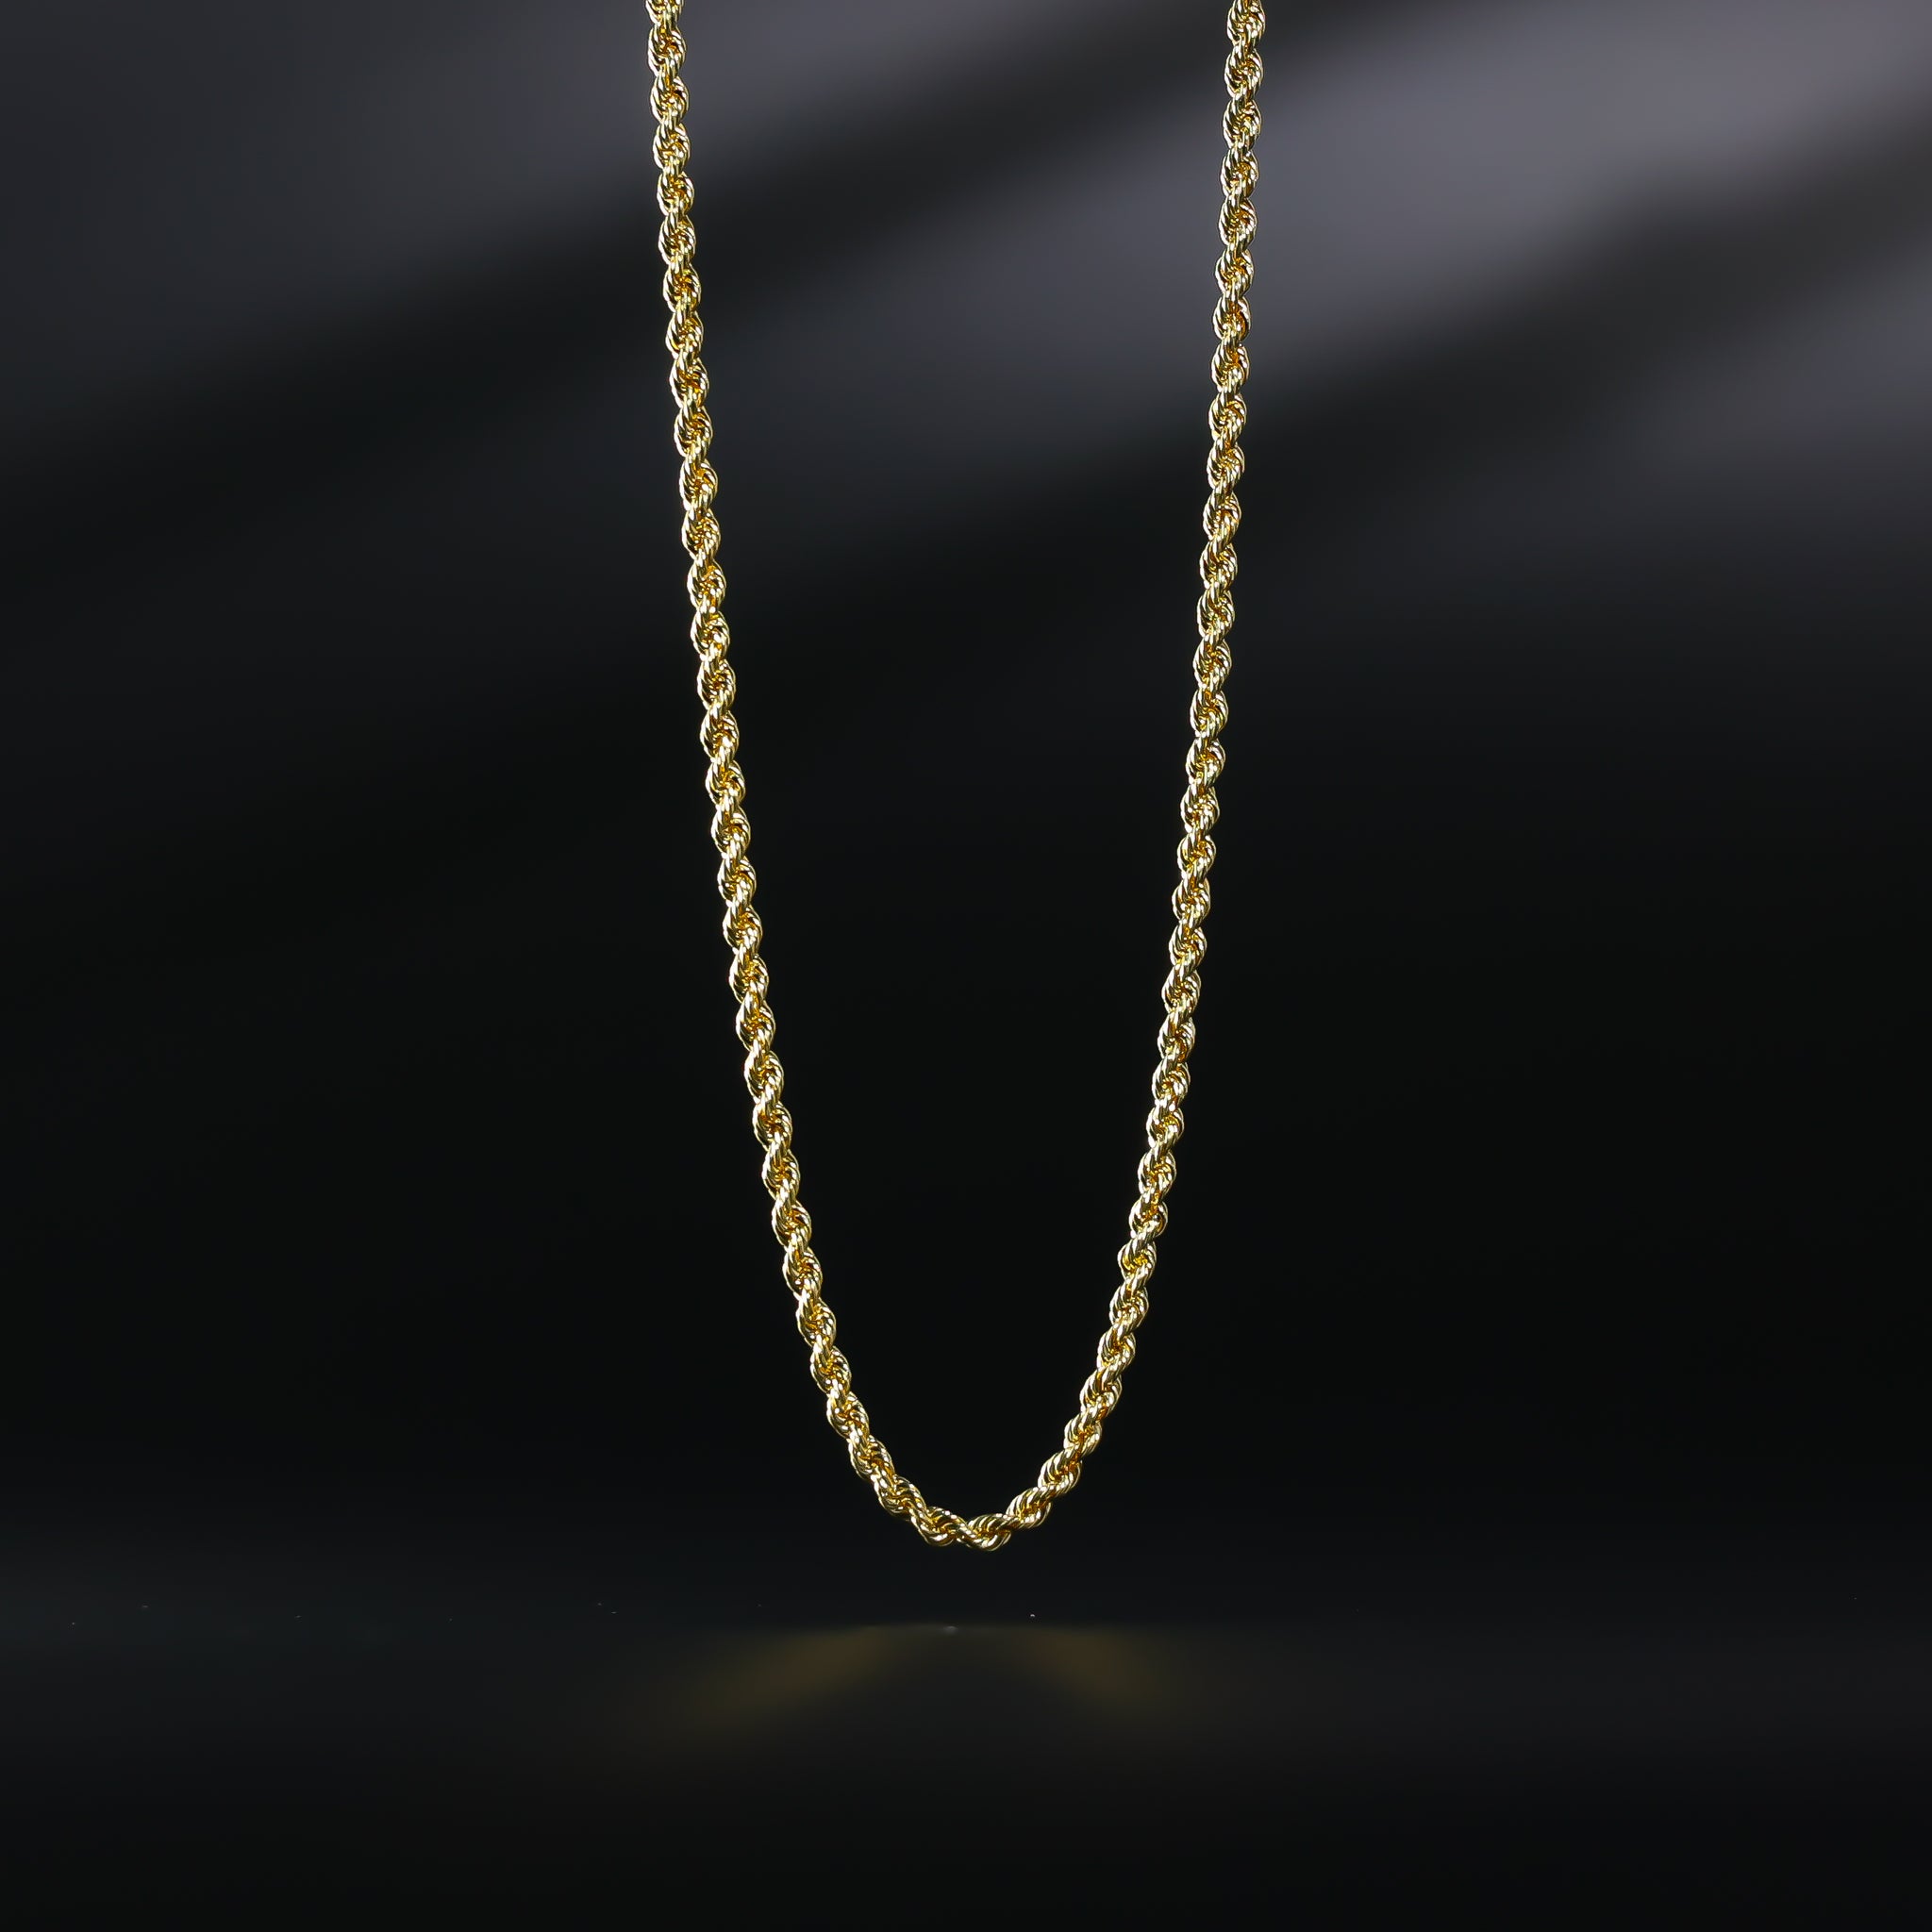 Dainty 2.5mm Paper Clip Link Necklace in 14K Gold